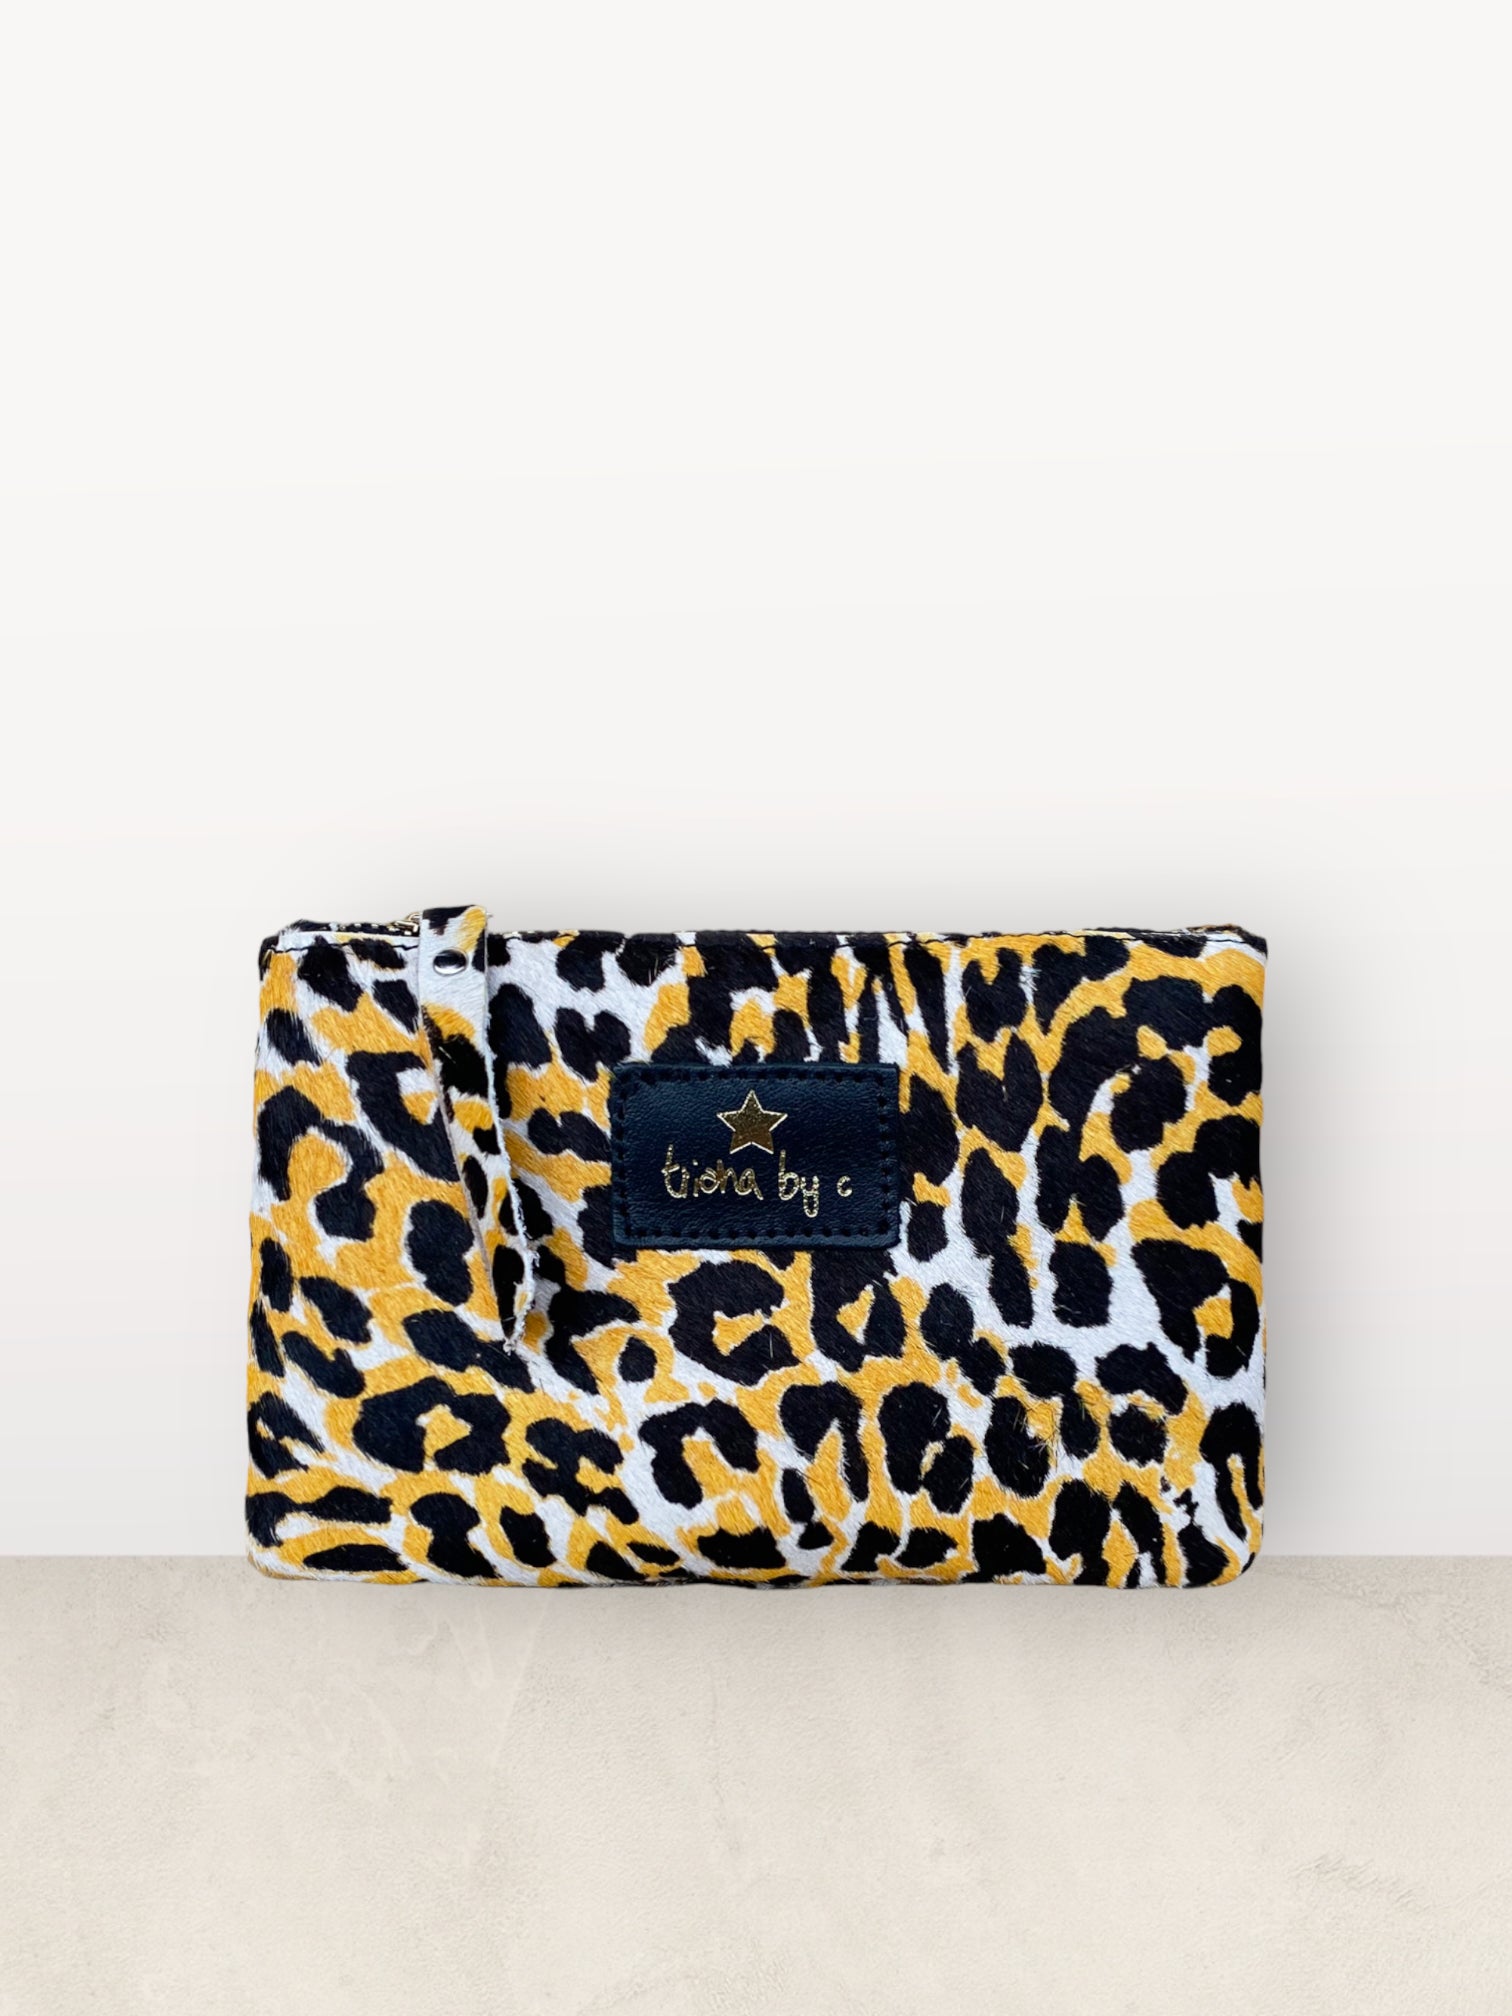 Animal print leather wallet